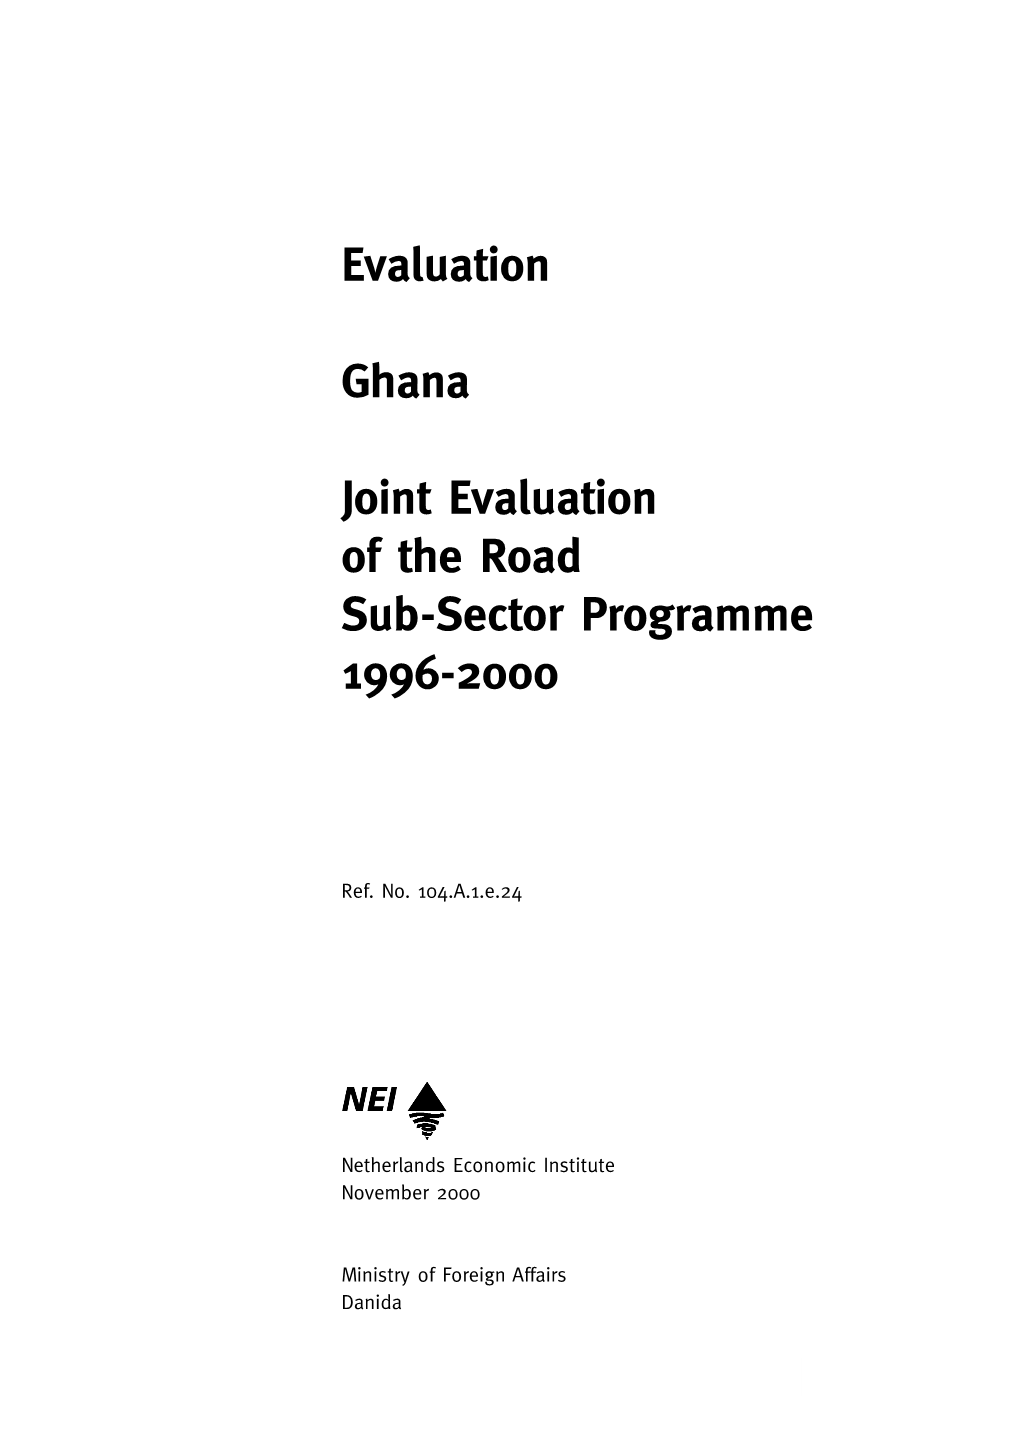 Evaluation Ghana Joint Evaluation of the Road Sub-Sector